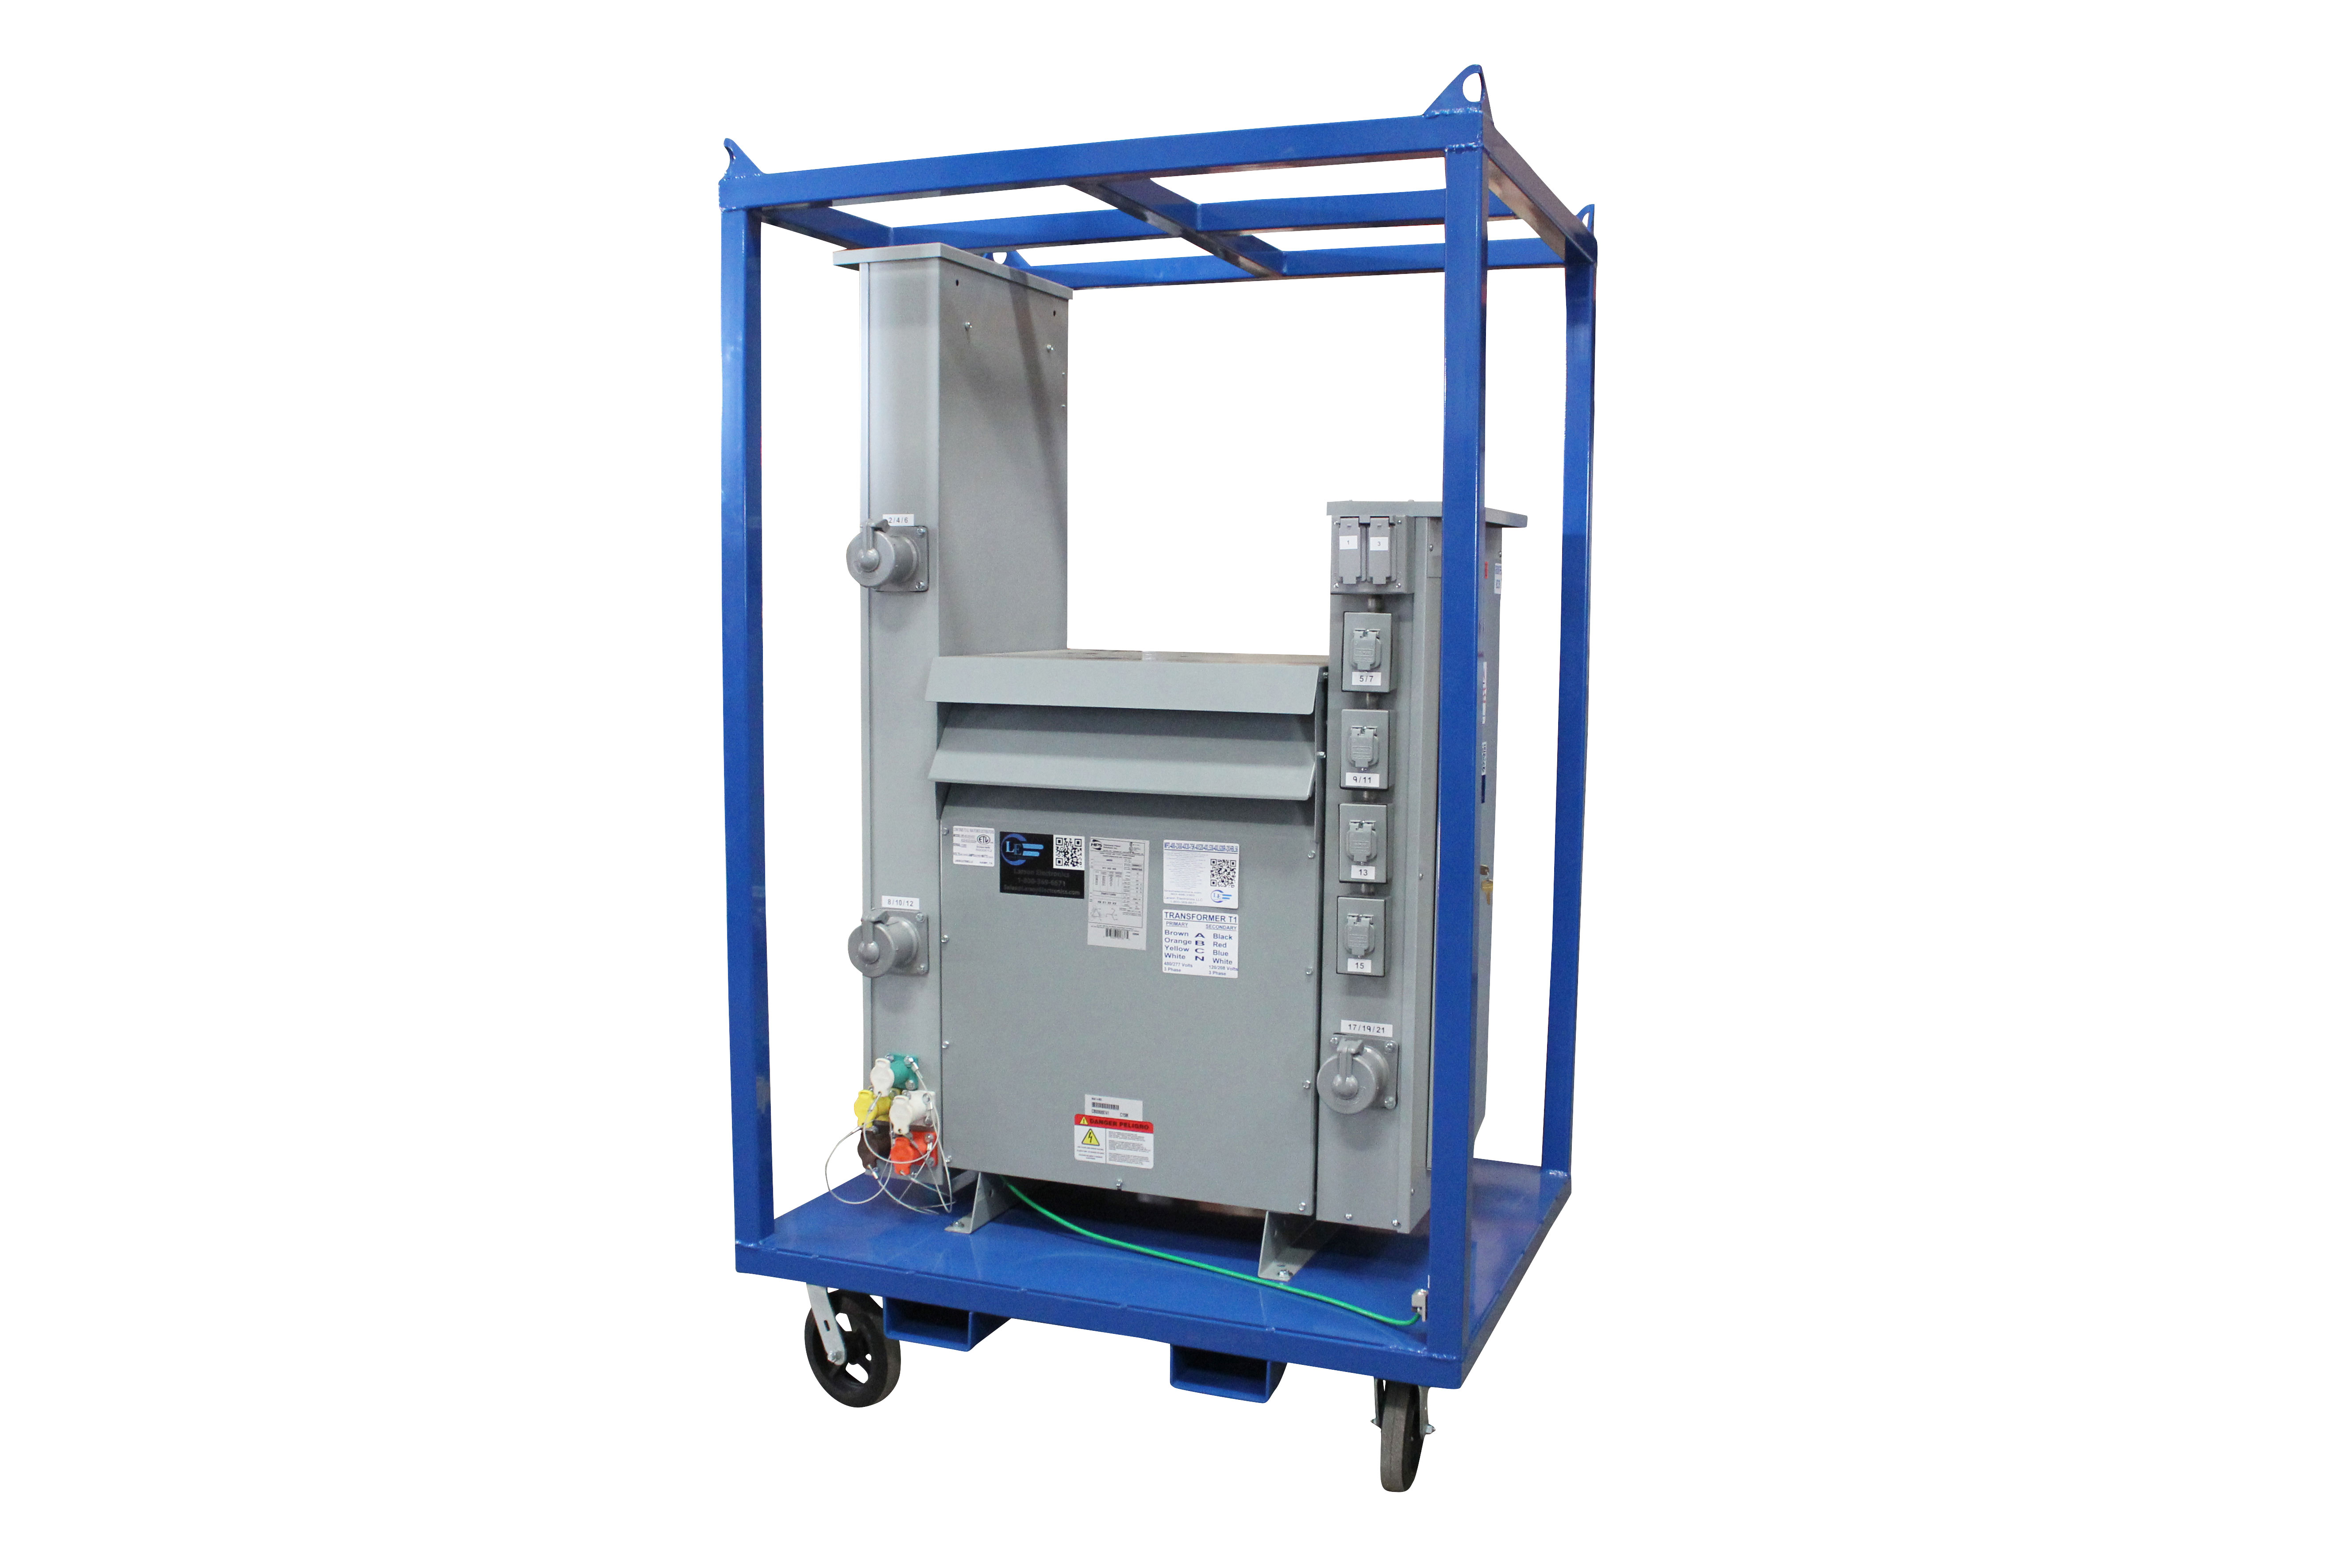 75 KVA Power Distribution System with multiple ports to power equipment